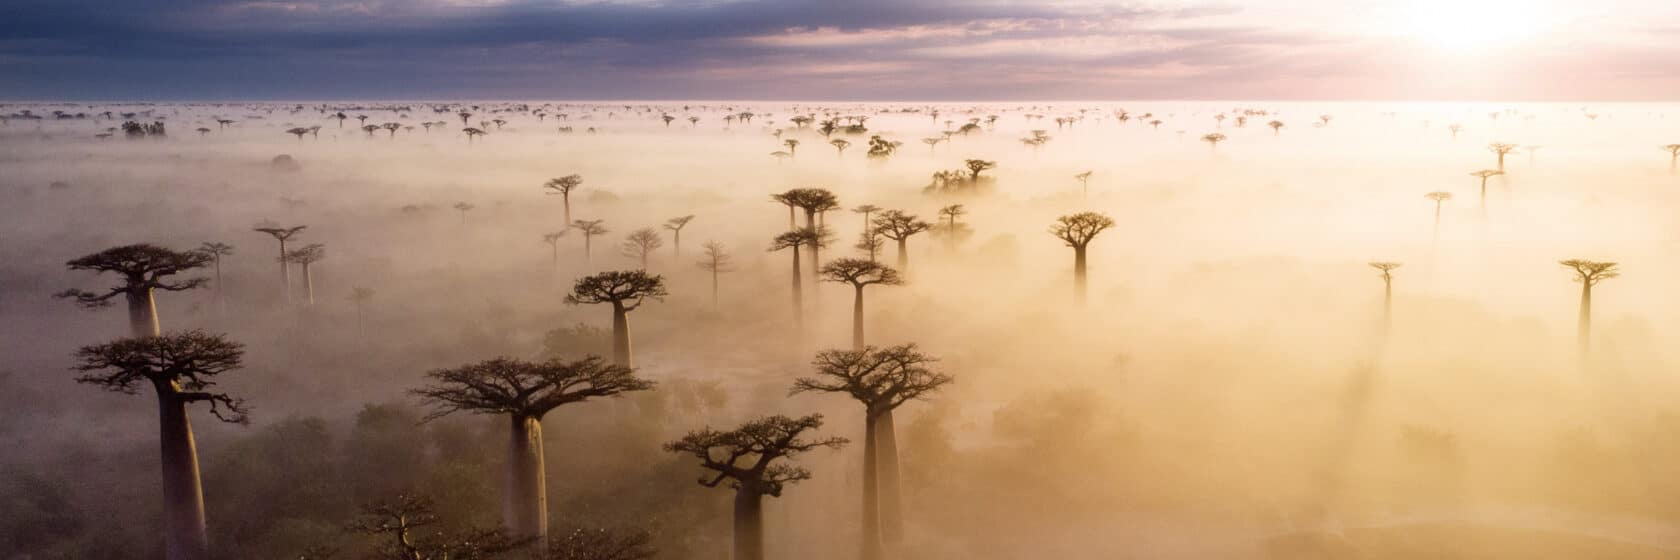 Baobab trees in the mist.